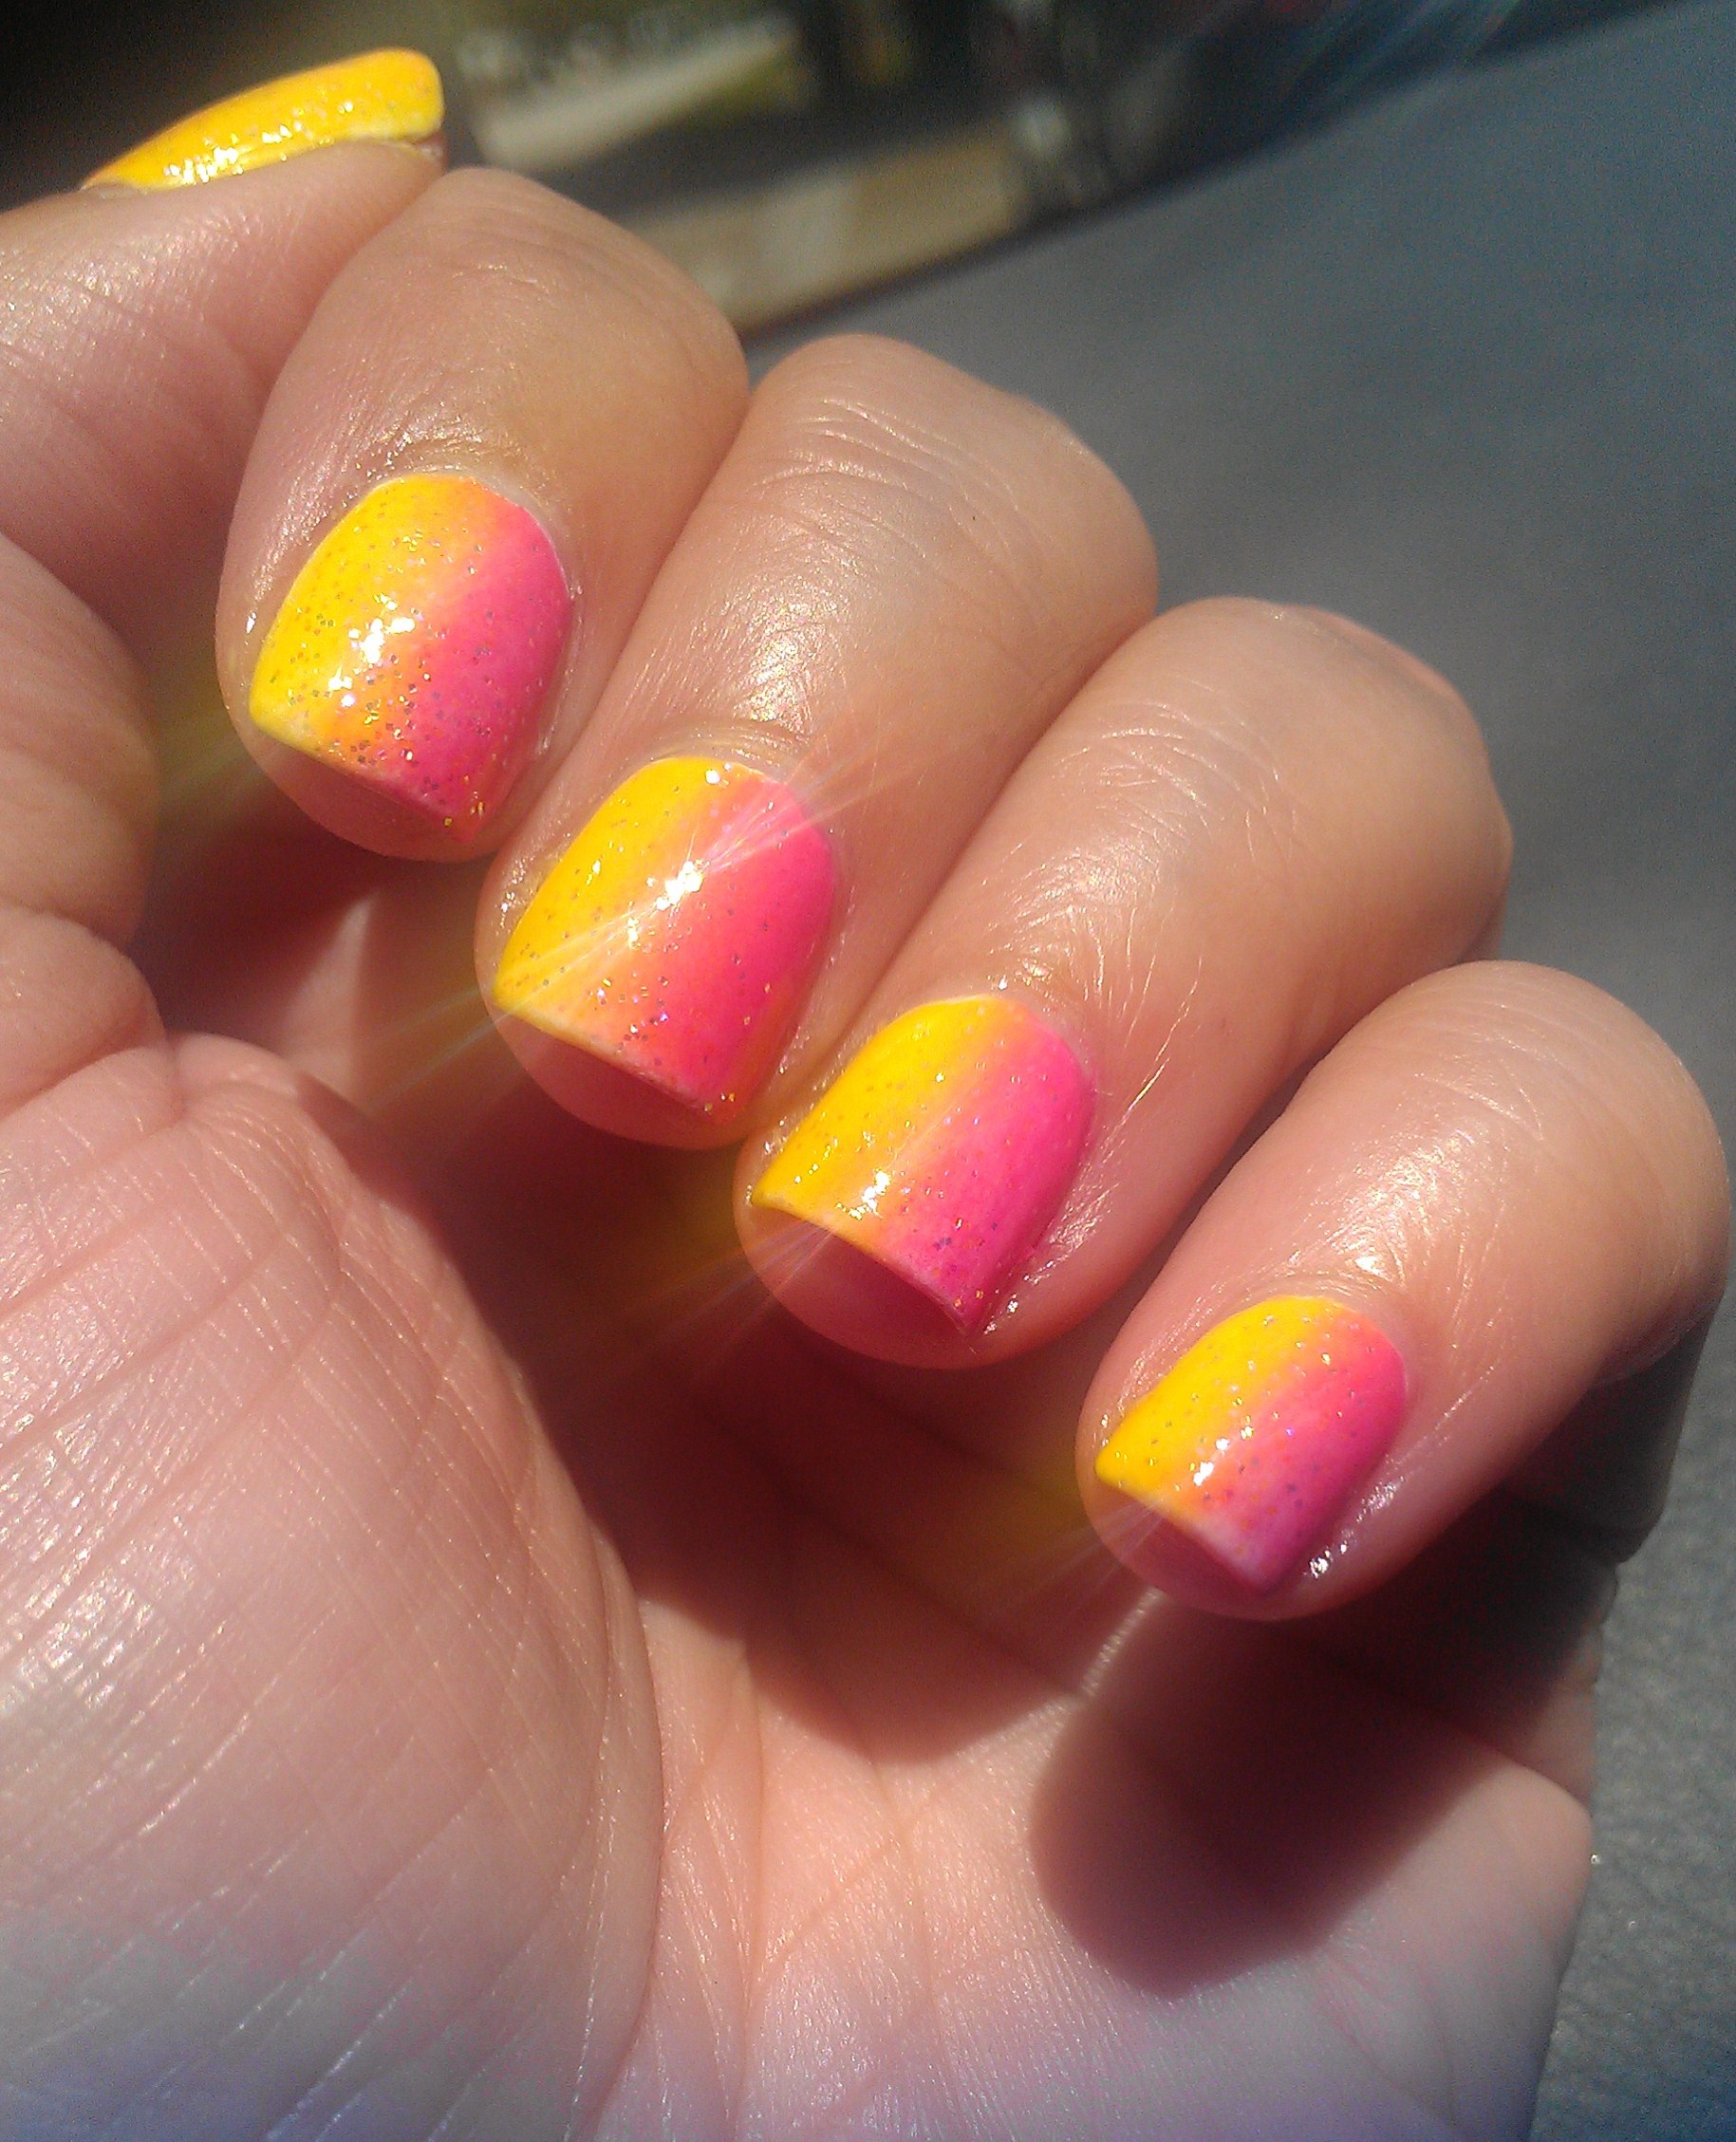 Beauty Tips for Women: Easter Gradient Manicure | bluebrainreviews.com